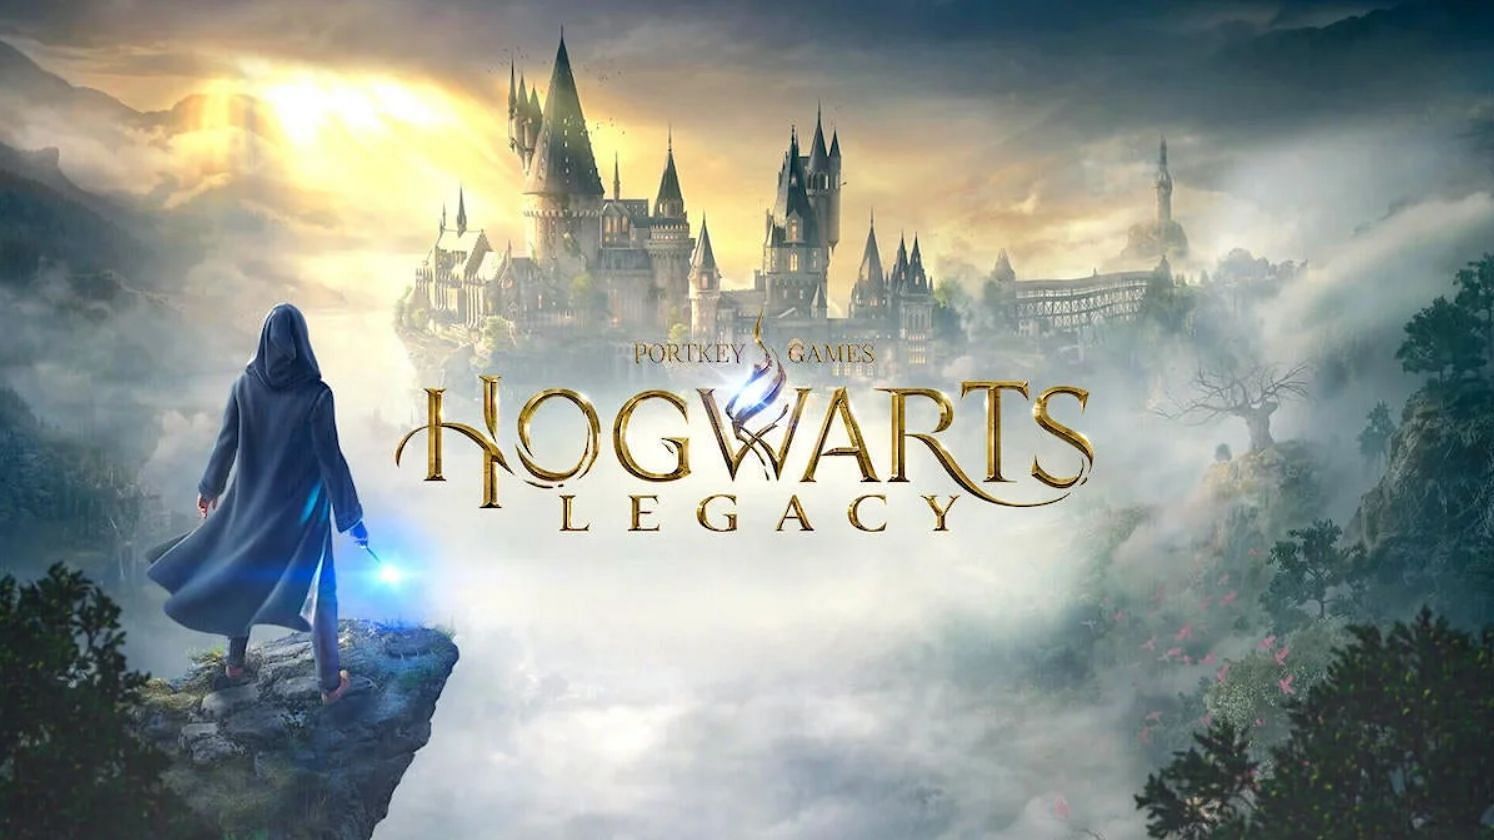 Do I Need to Watch Harry Potter Before Playing Hogwarts Legacy?